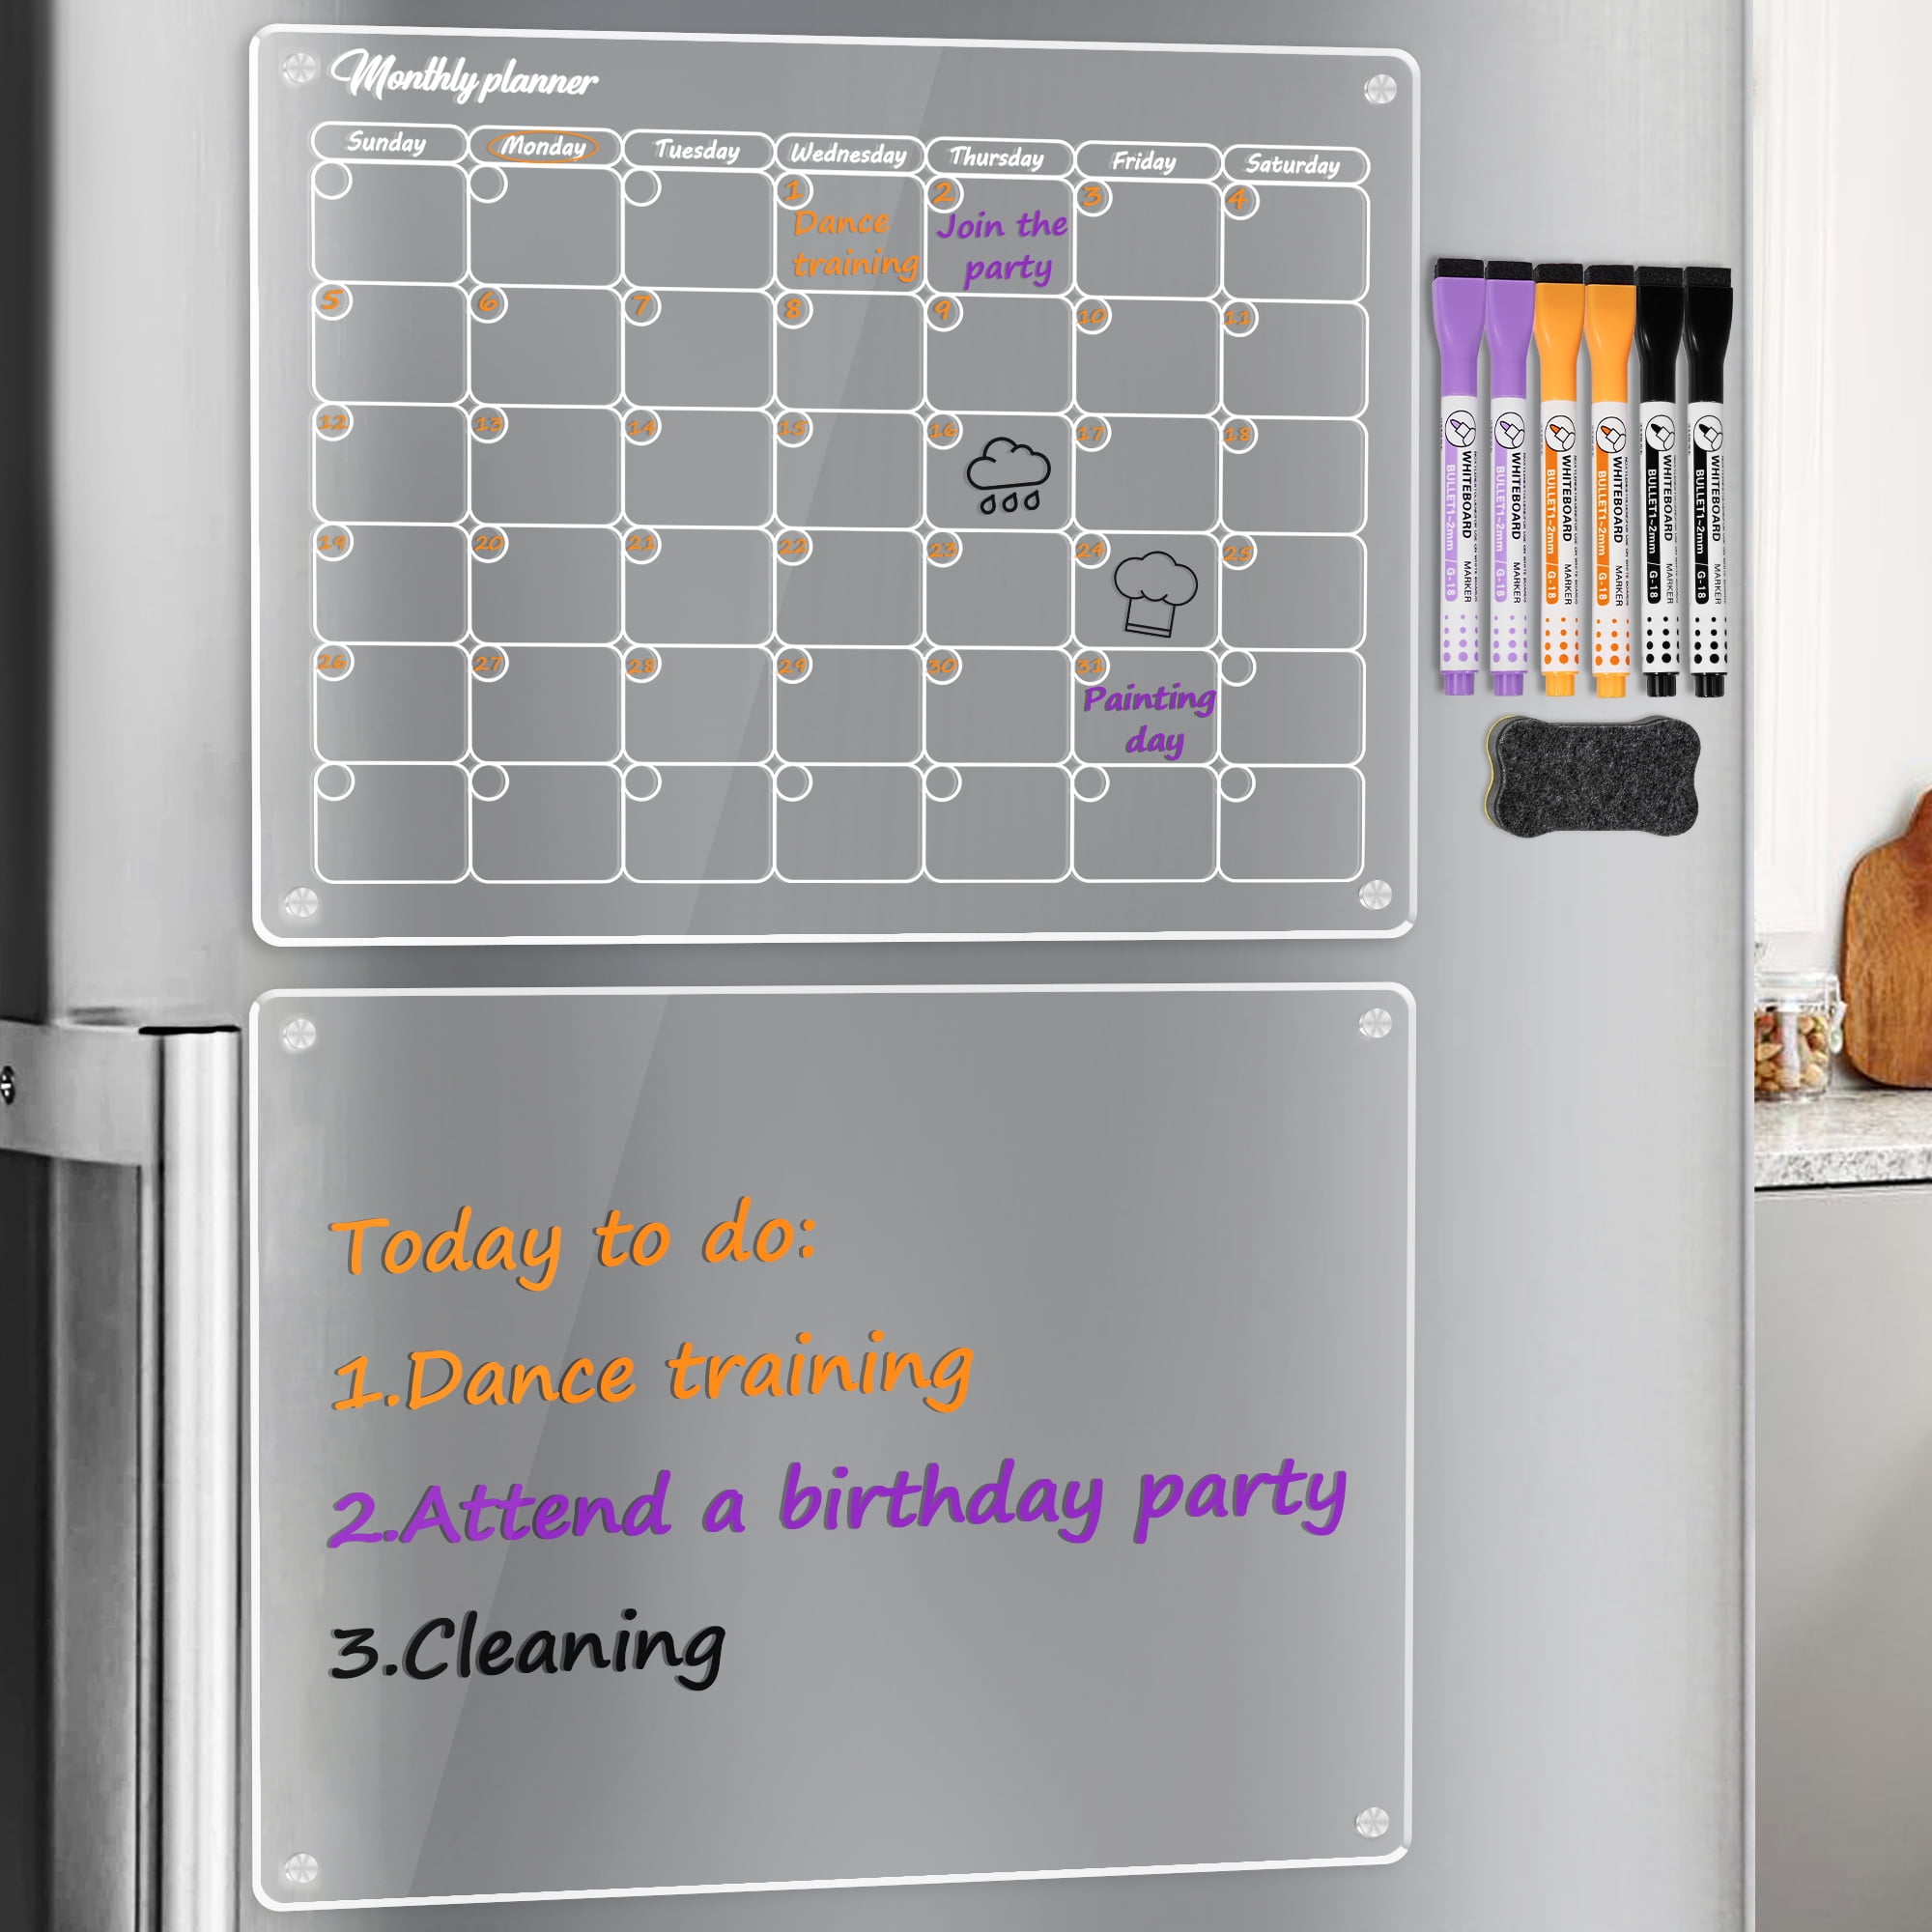 OORAII Magnetic Acrylic Calendar for Fridge Refrigerator Monthly Dry Erase Board w/ 8 Markers & Magnetic Pen Holder, Organic Glass Clear Planning